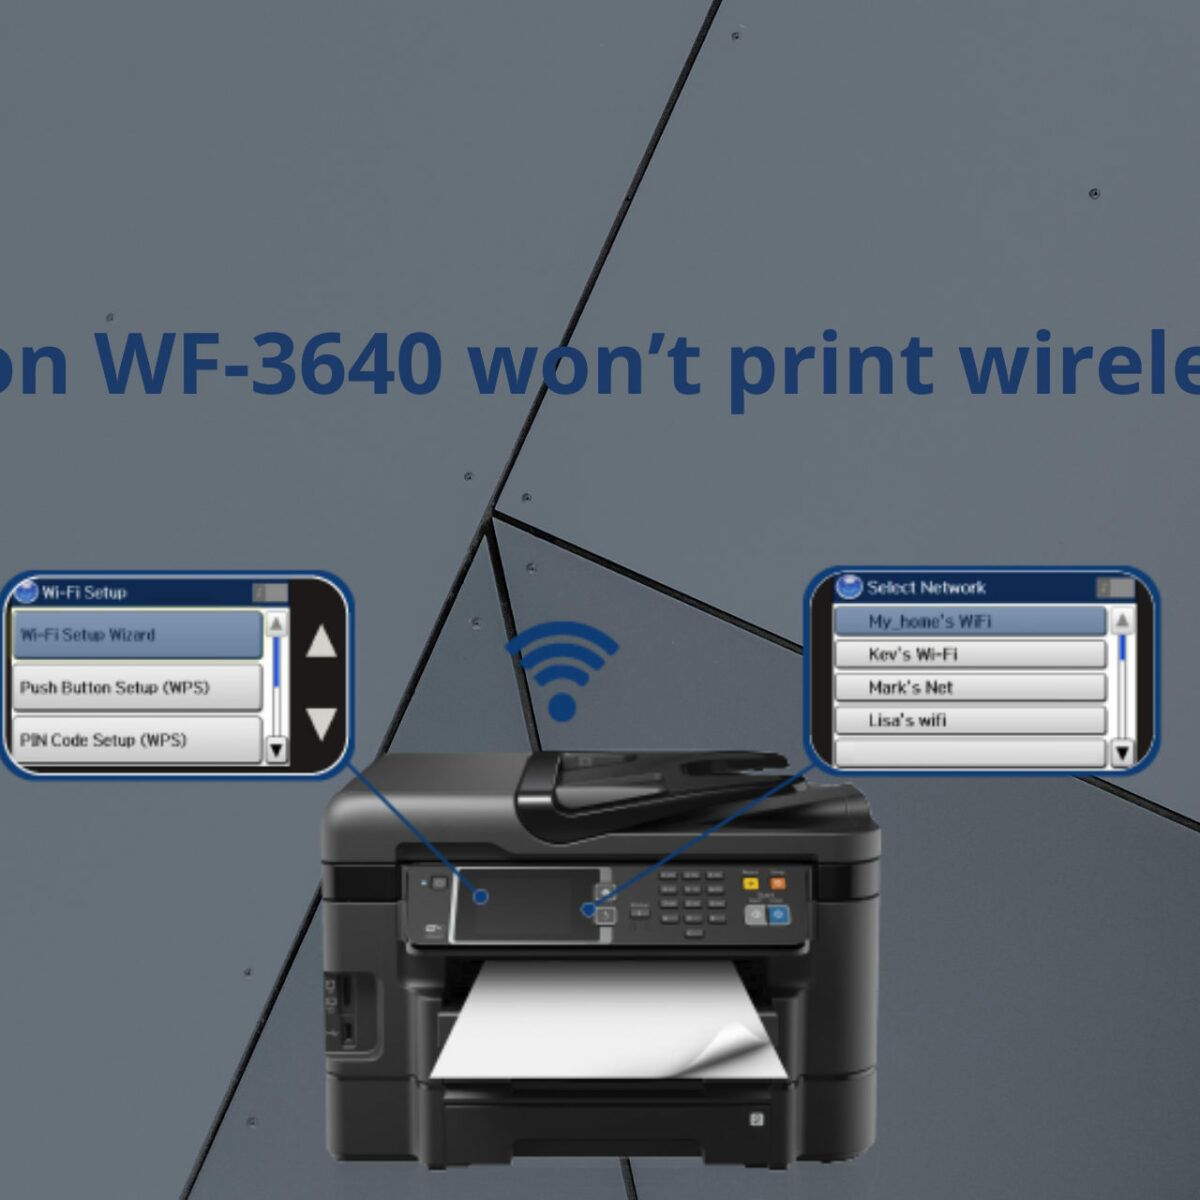 Epson WF-3640 print wirelessly [Troubleshooting guide]